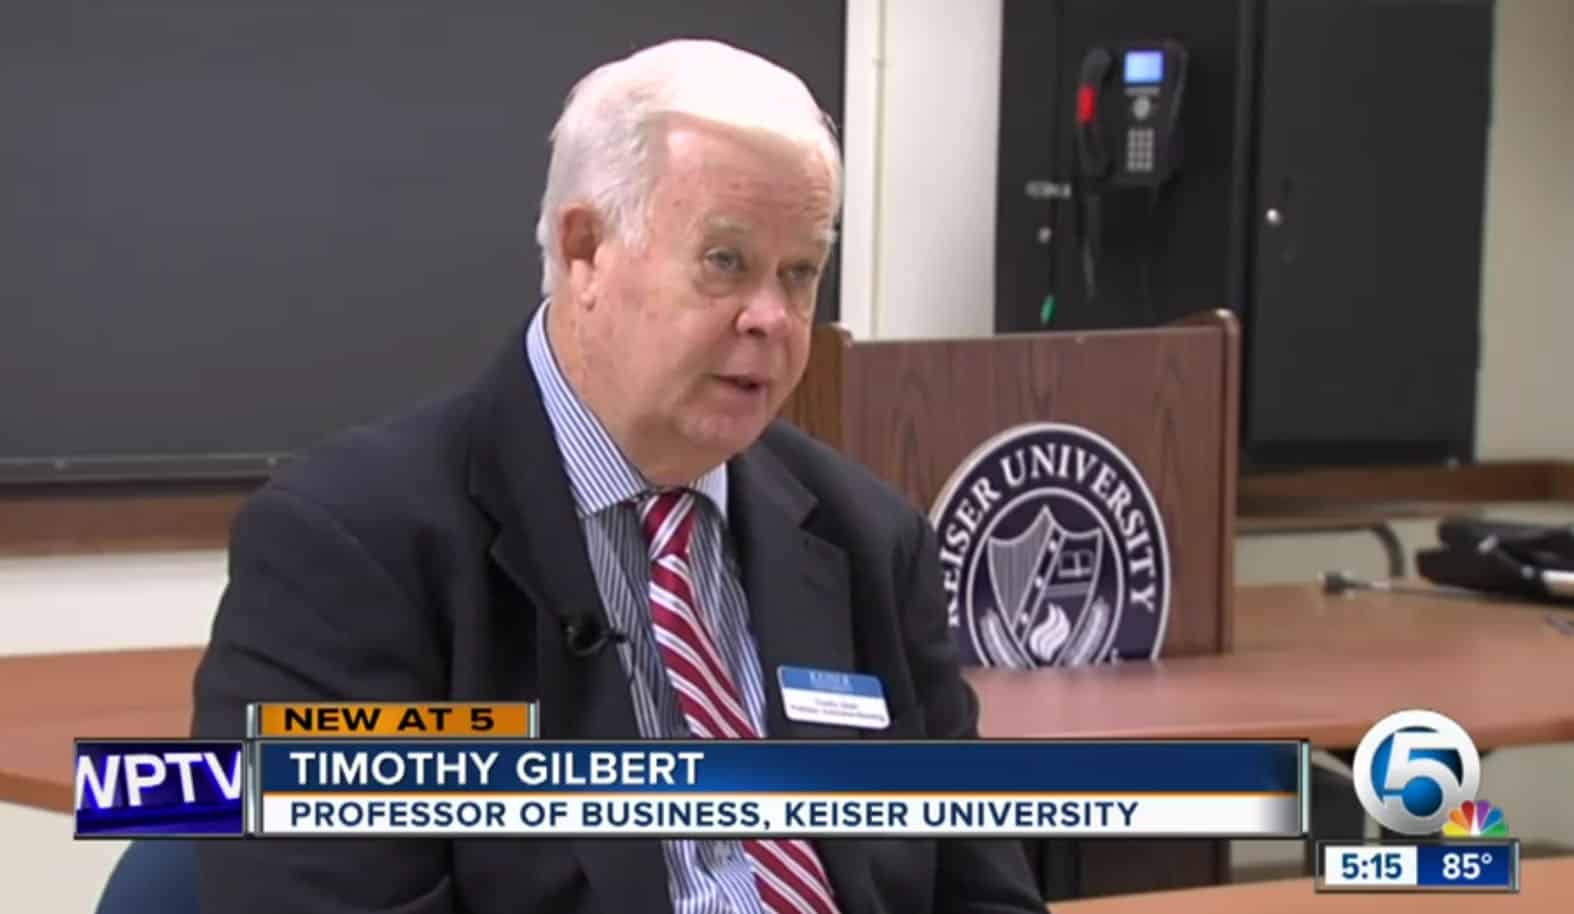 Flagship Professor Shares Insight with NBC Viewers